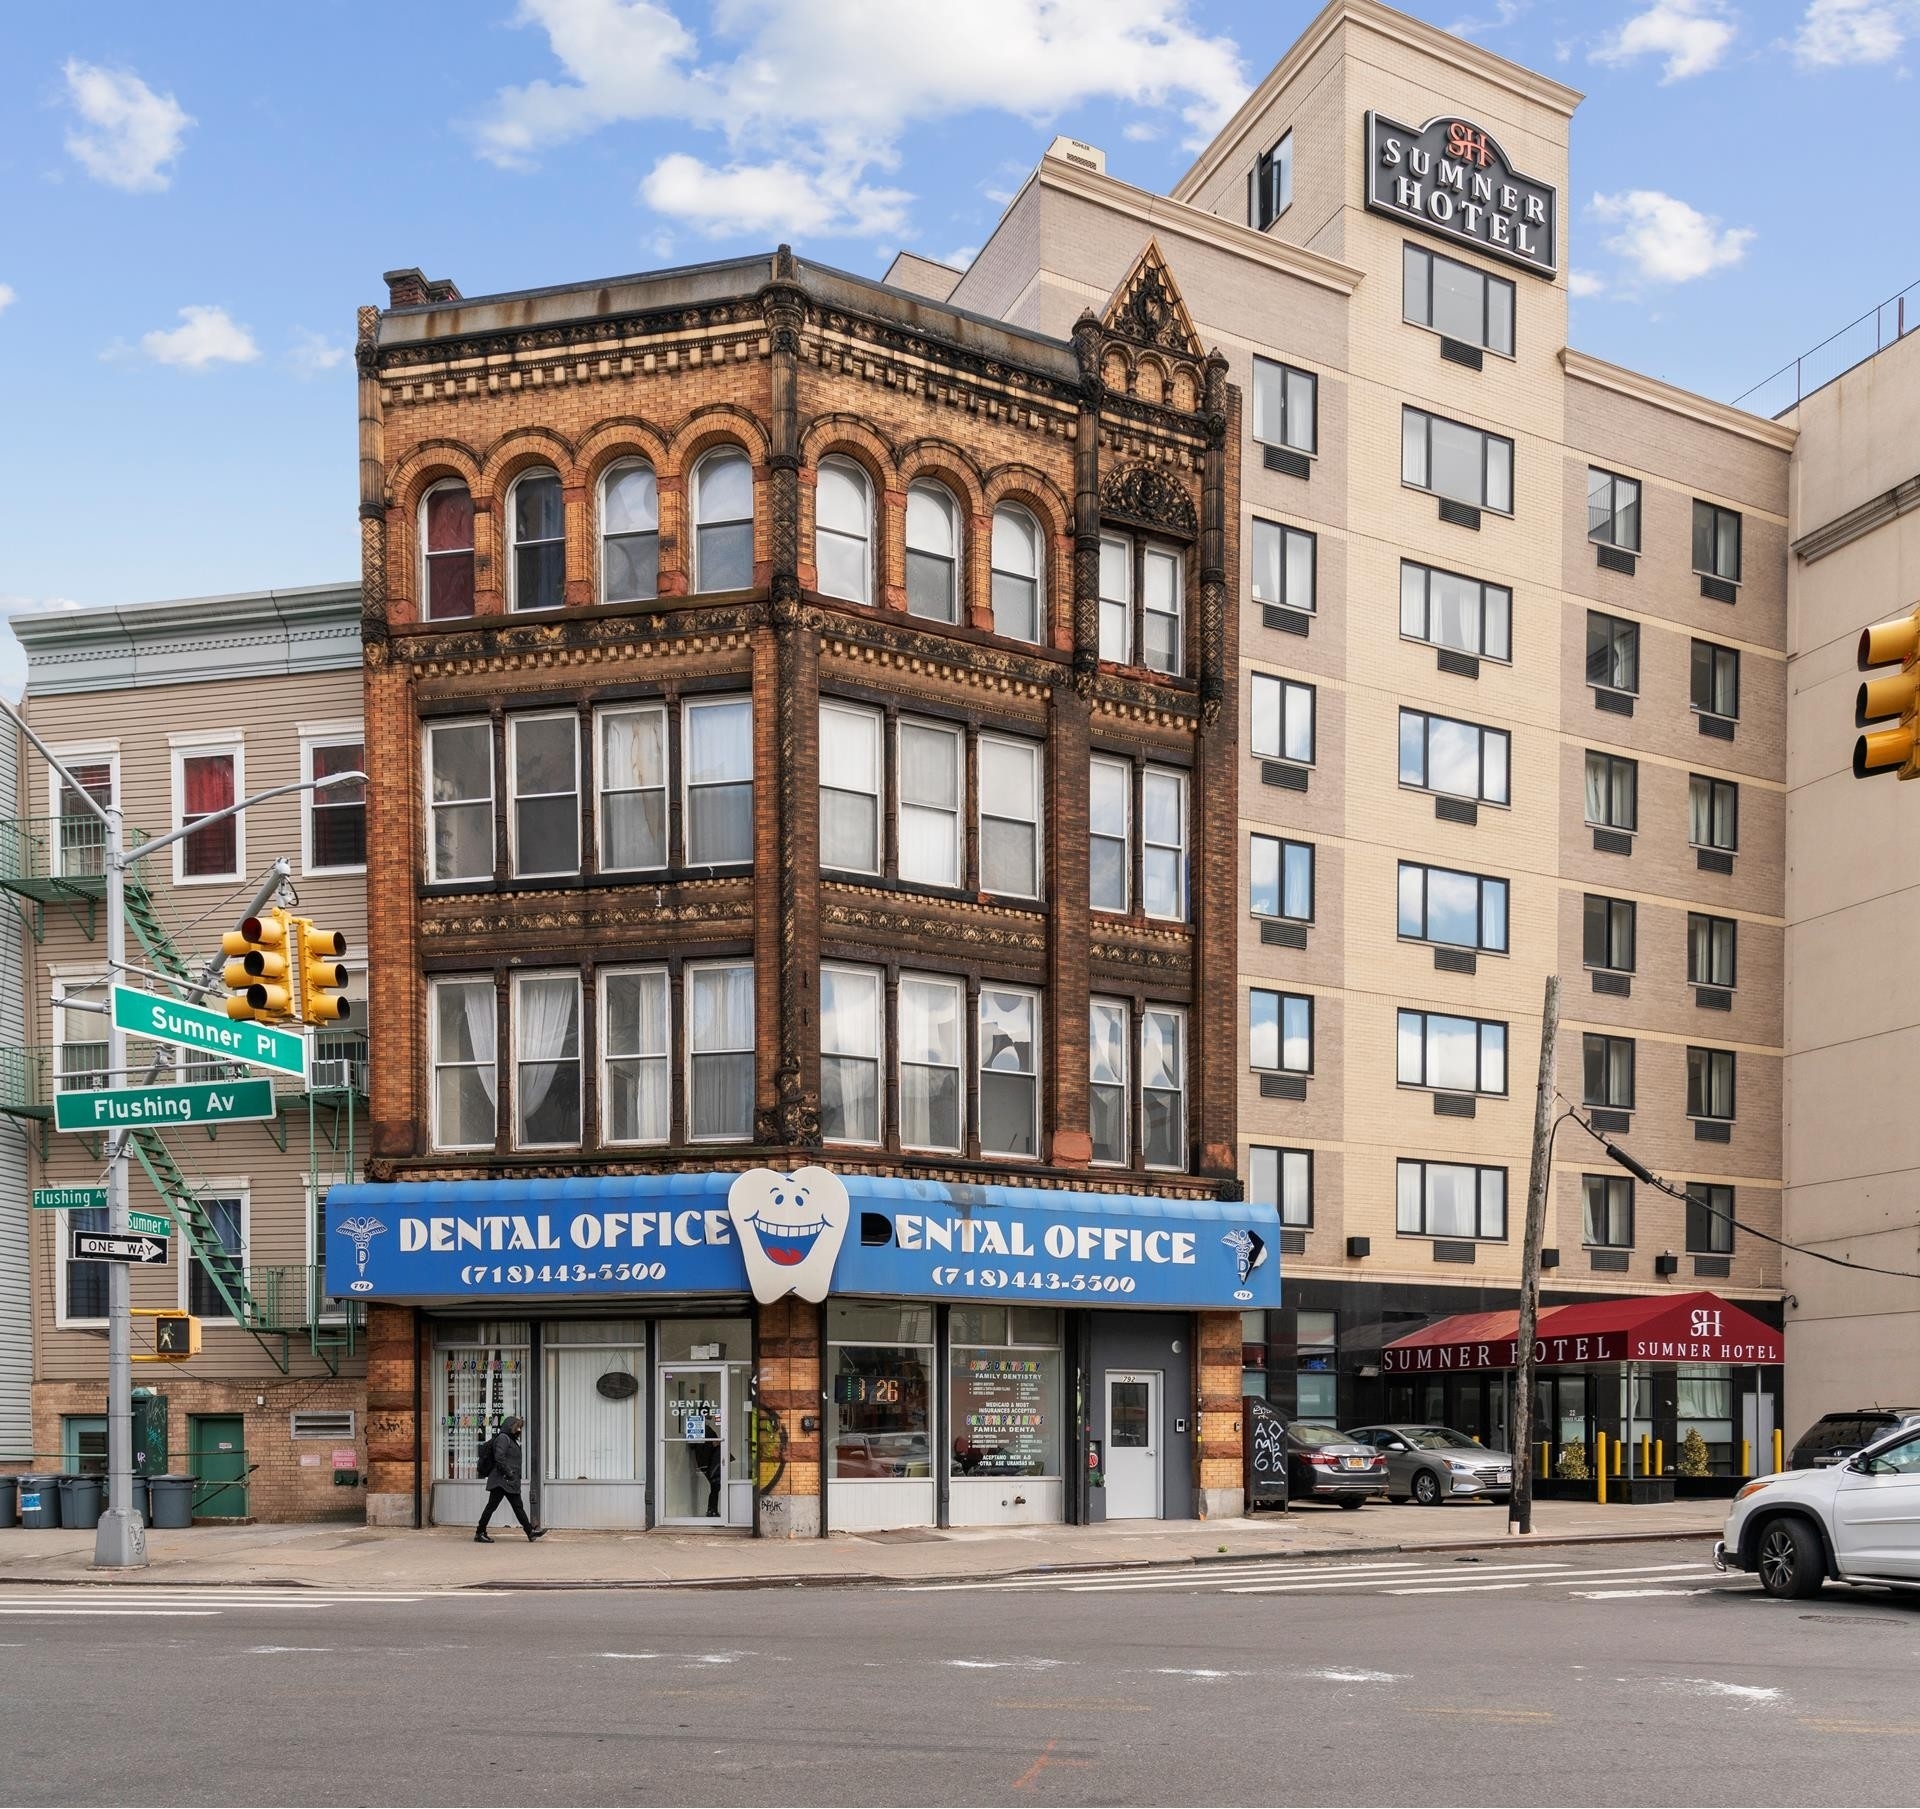 Townhouse Mixed Use for Sale at 792 FLUSHING AVE, BUILDING Bushwick, Brooklyn, New York 11206